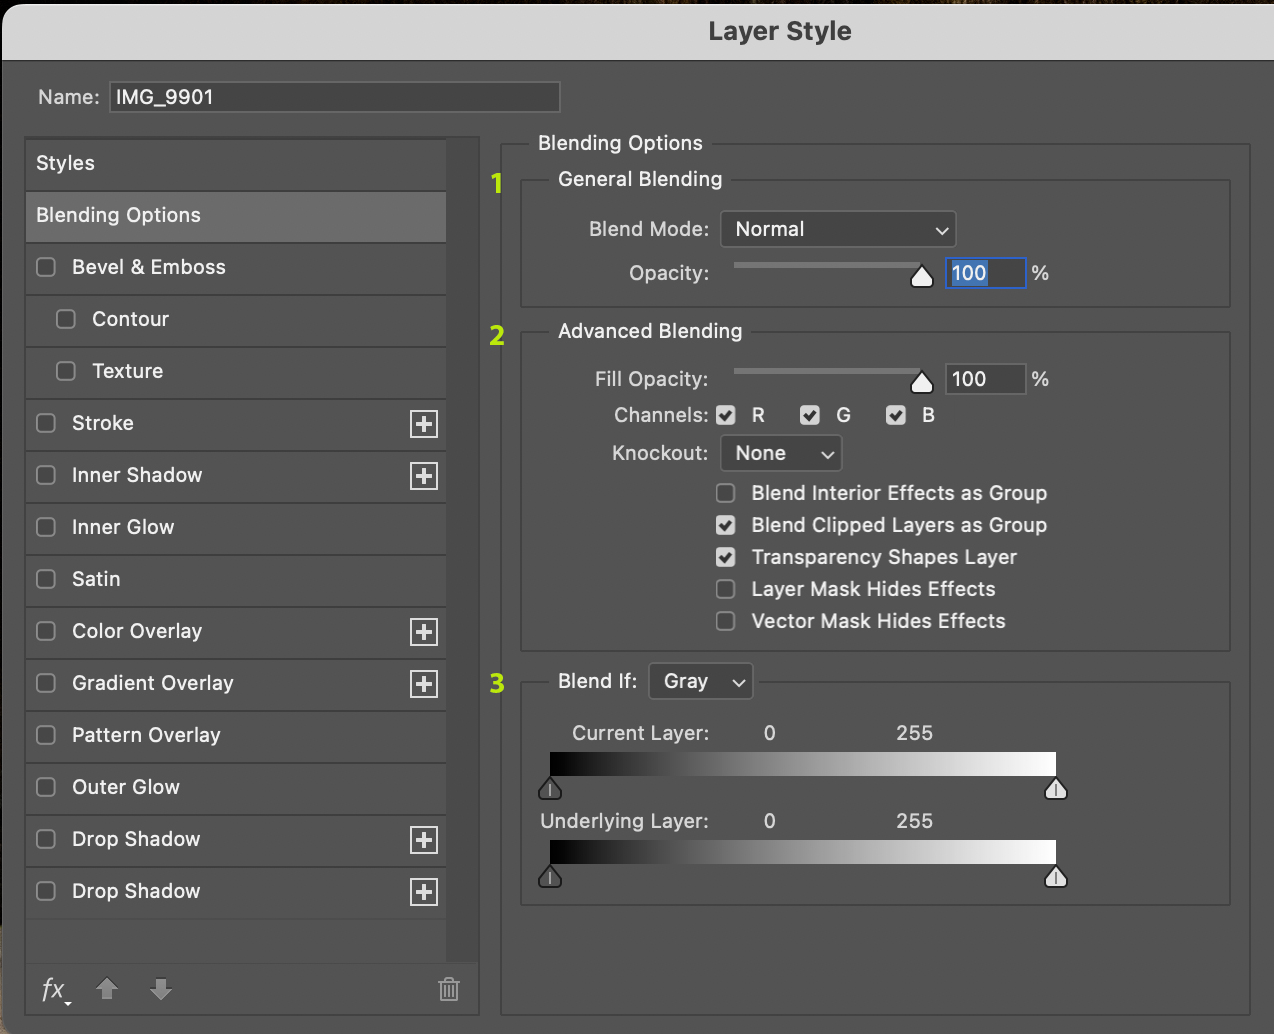 Blending Options as seen in the Layer Style dialog box.